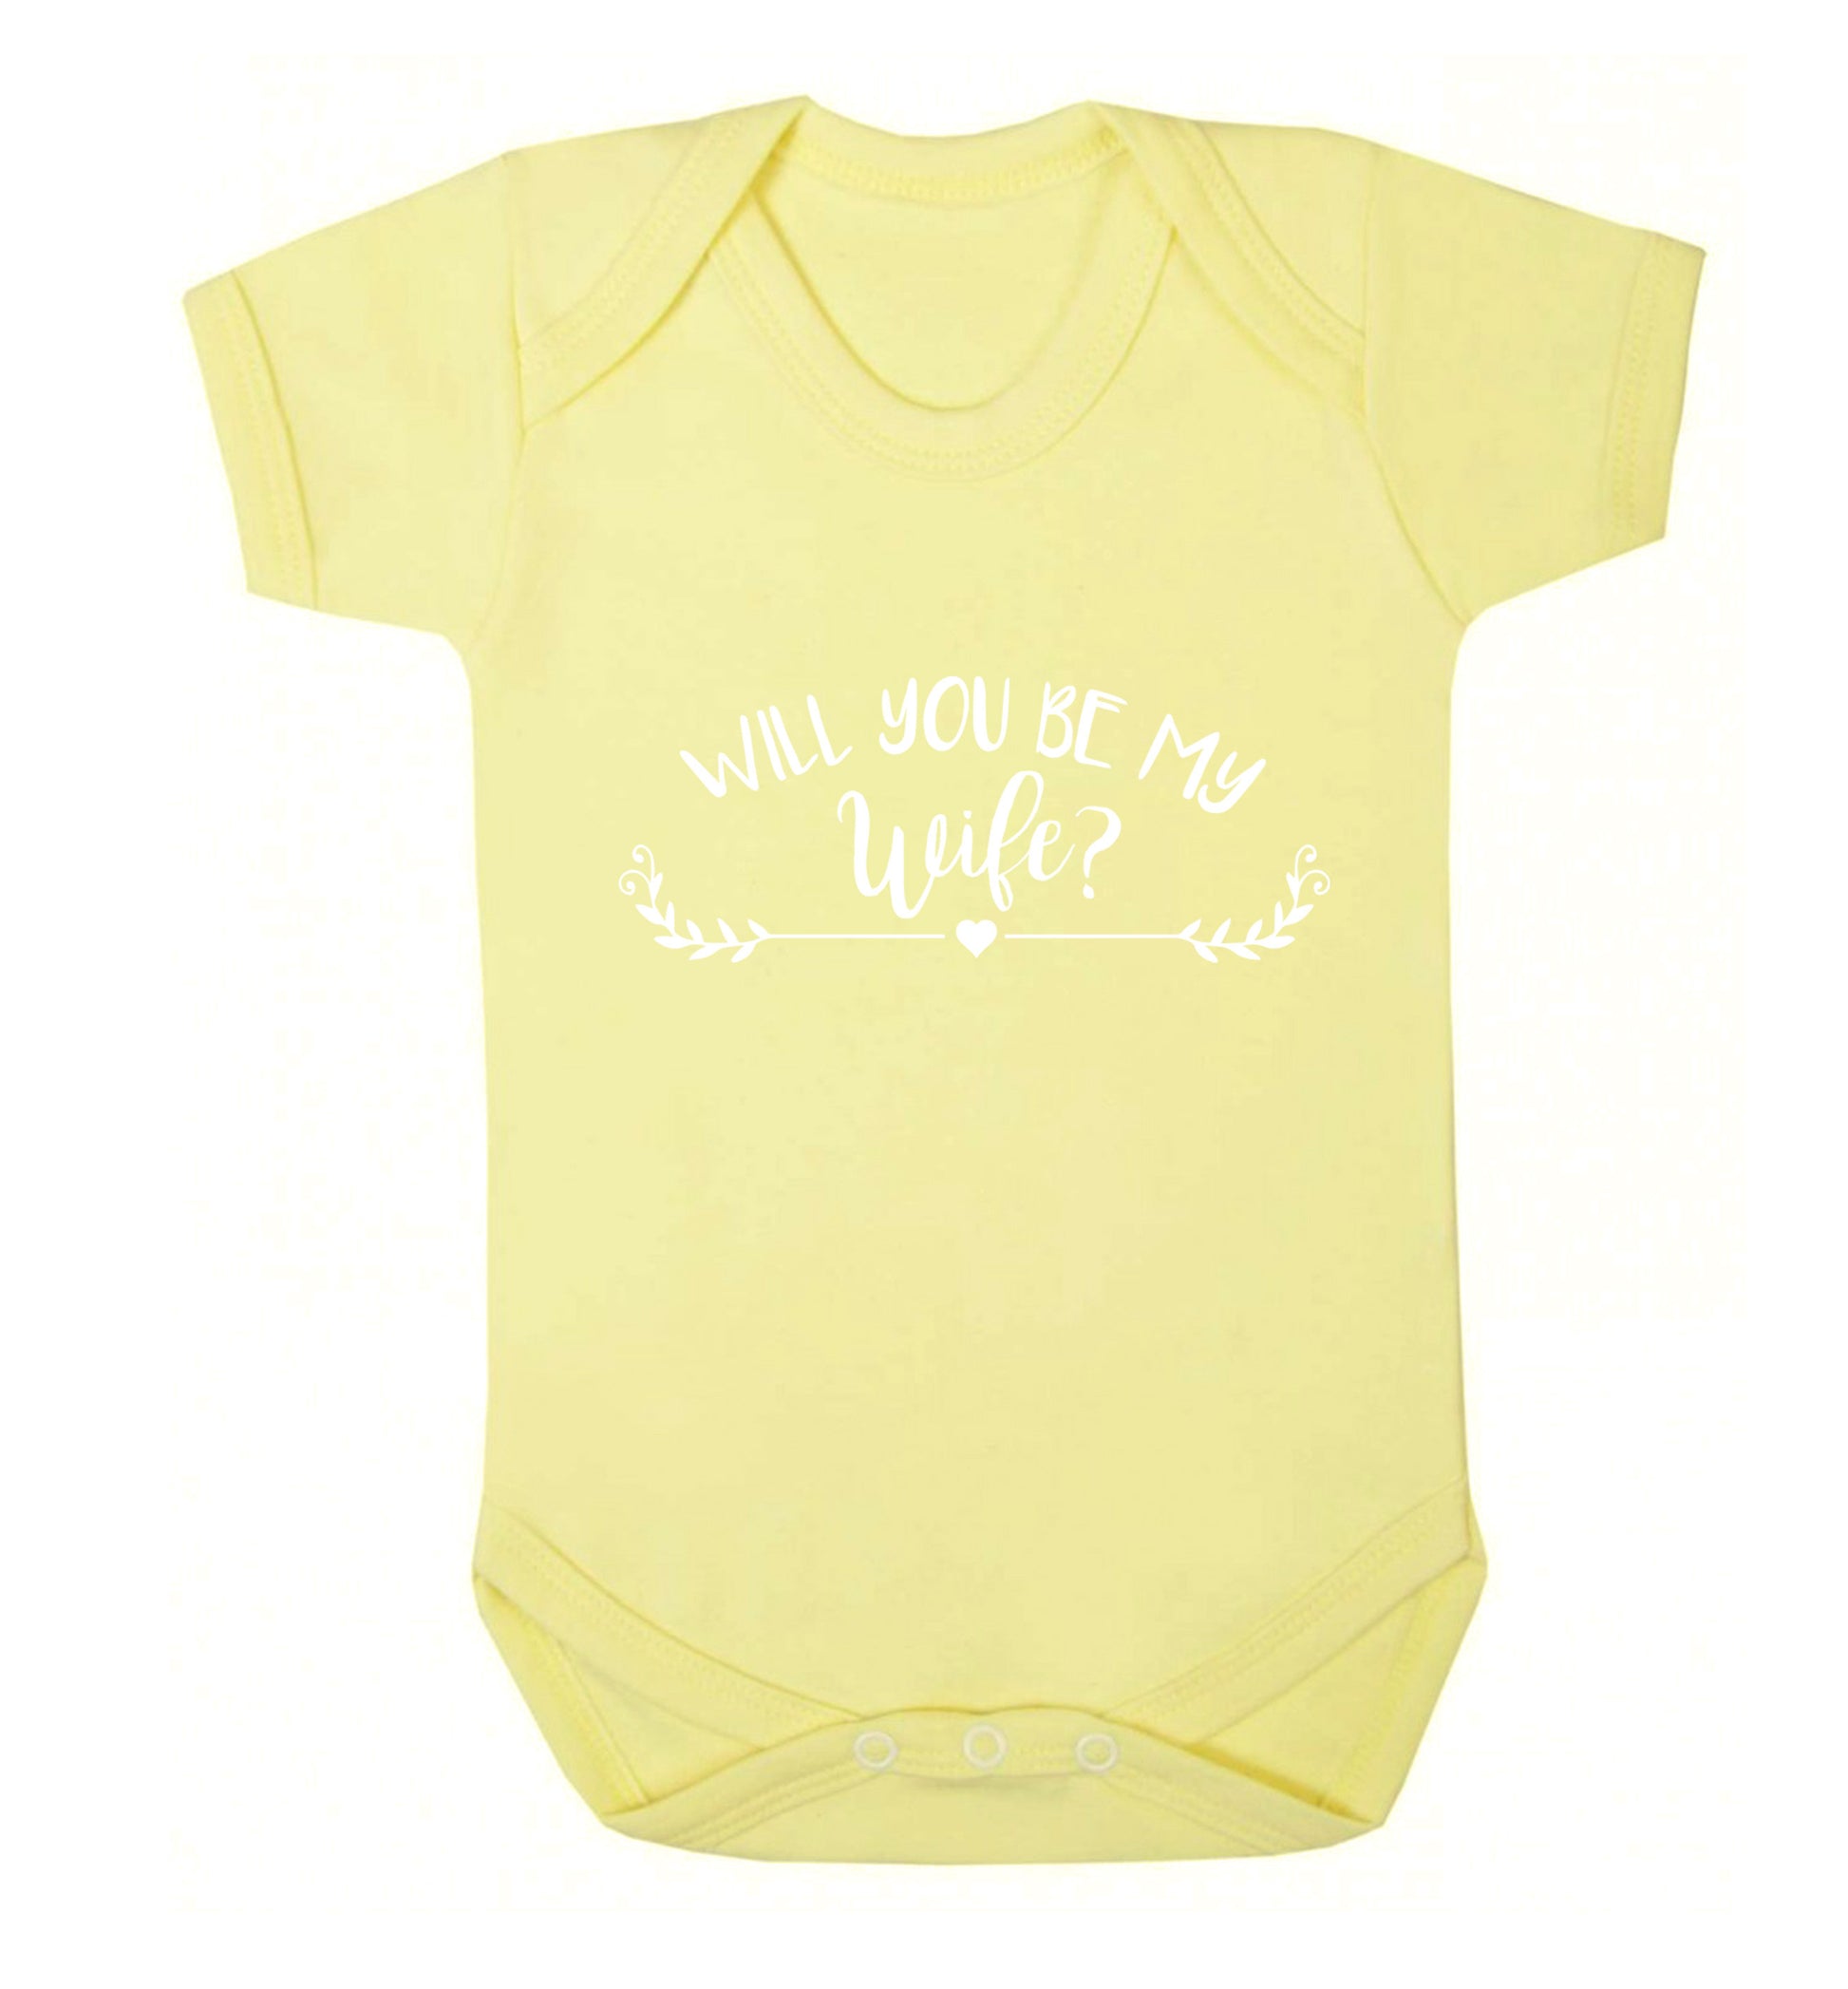 Will you be my wife? Baby Vest pale yellow 18-24 months